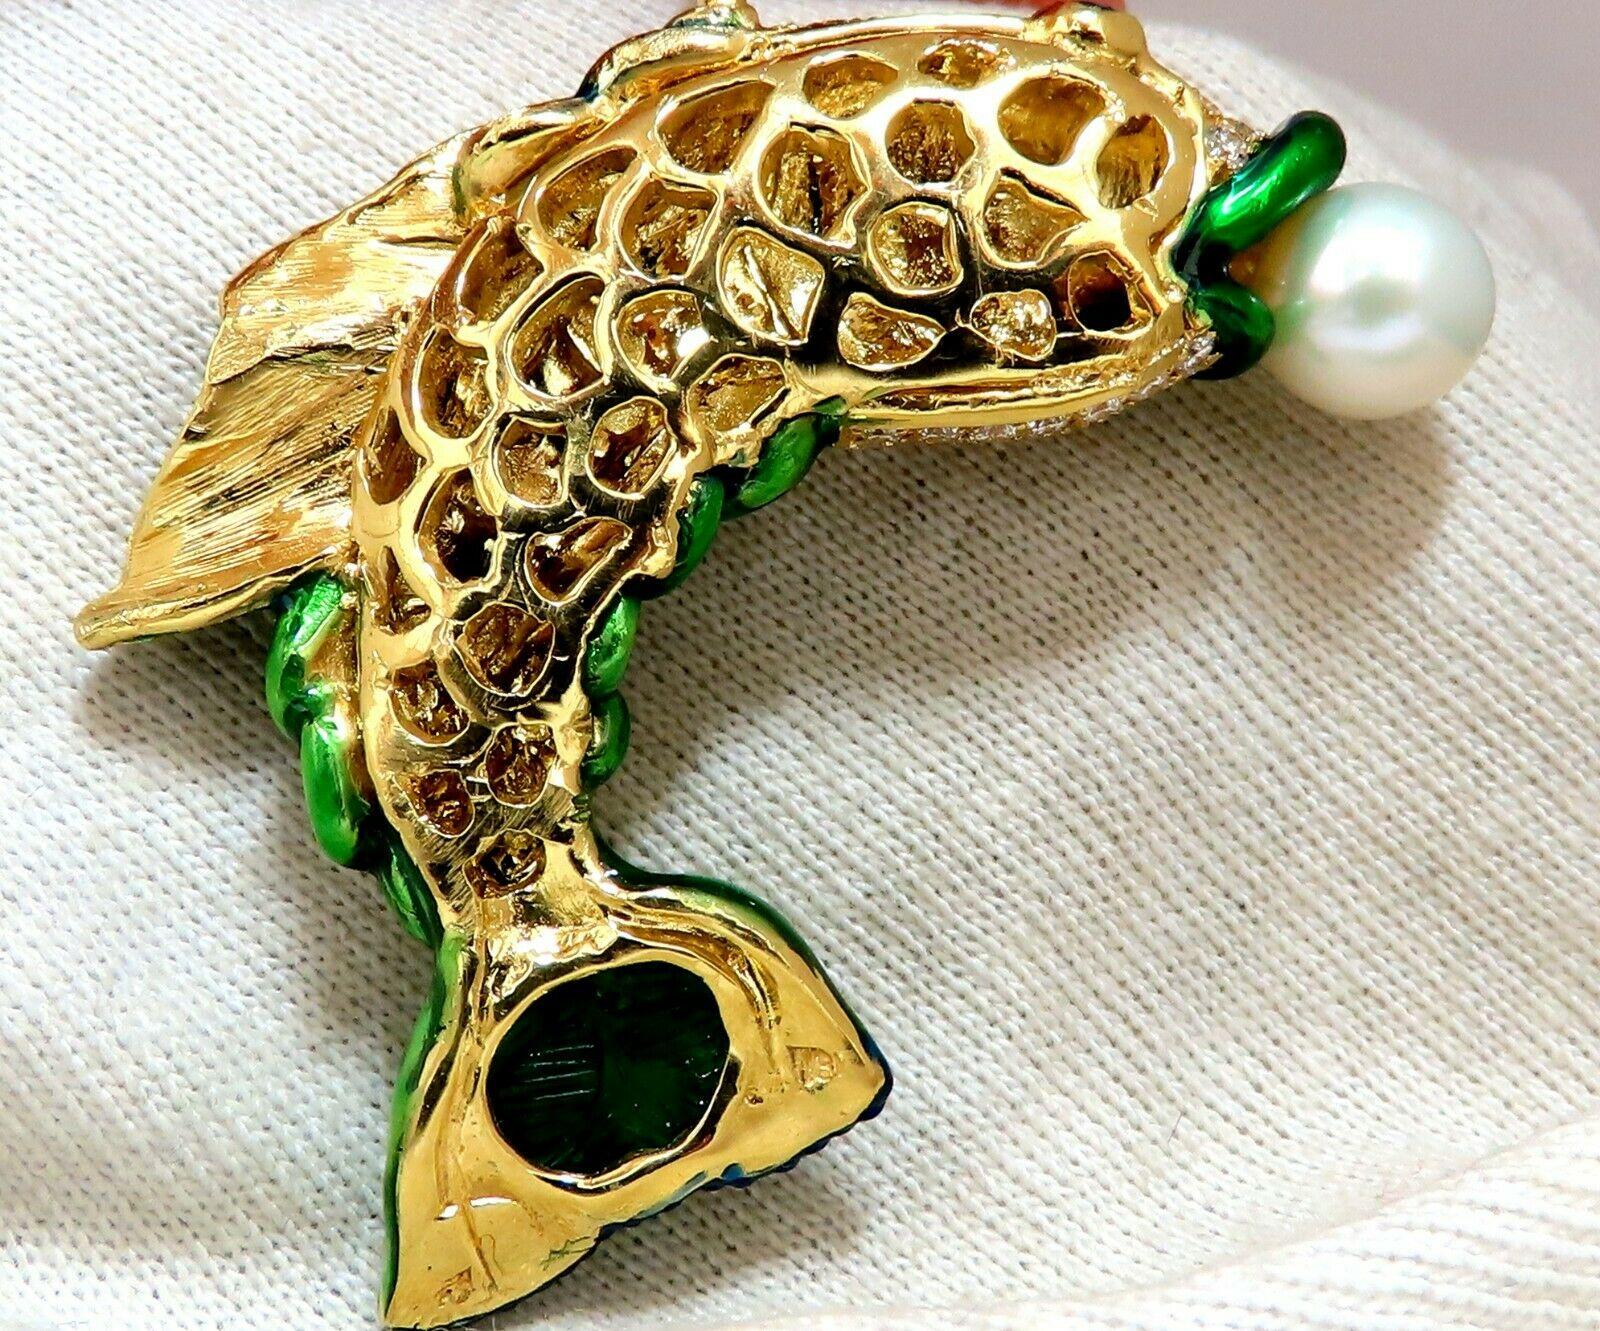 Lucky Catch.

9.5mm Natural Japanese Akoya Pearl
5.50ct. Natural Diamonds fish pendant.
Custom Handmade made 
Rounds and Baguettes.
G-color, Vs-2 clarity

.24ct Natural Round Sapphire (Eye)
4.00ct Natural Carved Green Emerald (Tail)
3D domed